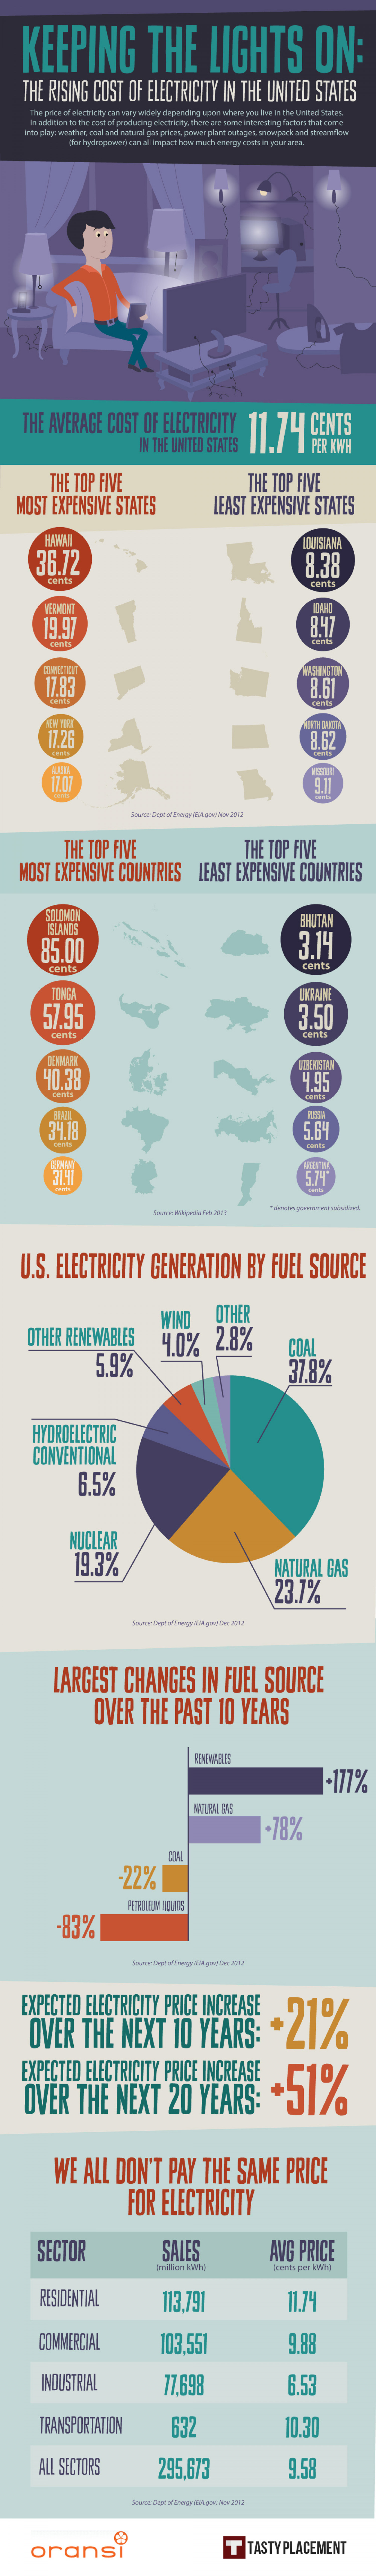 Keeping the Lights On: The Rising Cost of Electricity in the United States Infographic